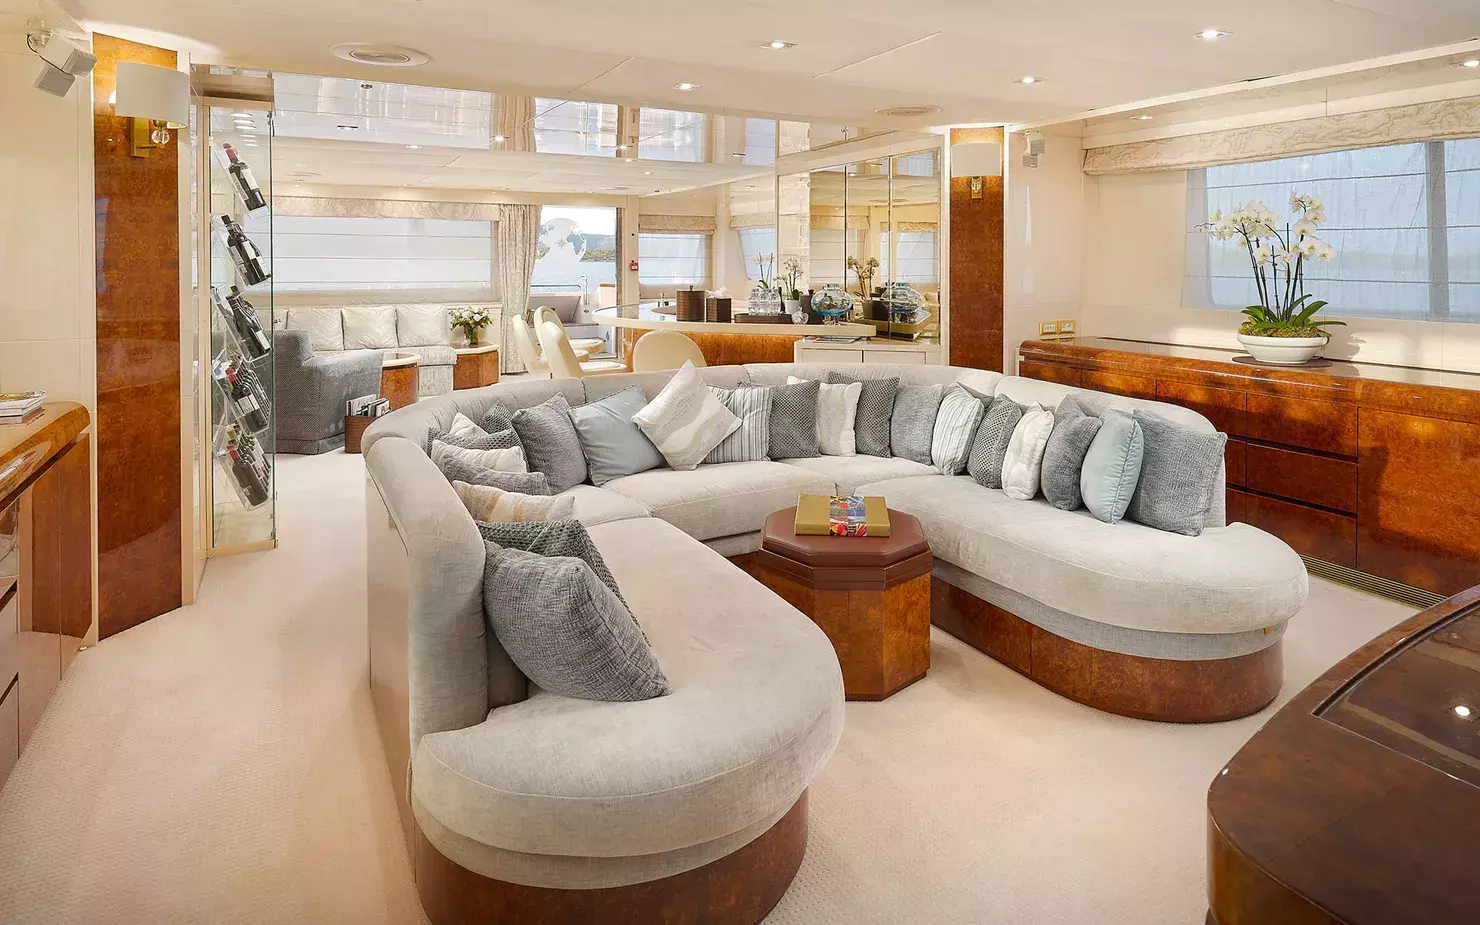 Ladyship by Heesen - Top rates for a Rental of a private Superyacht in Croatia